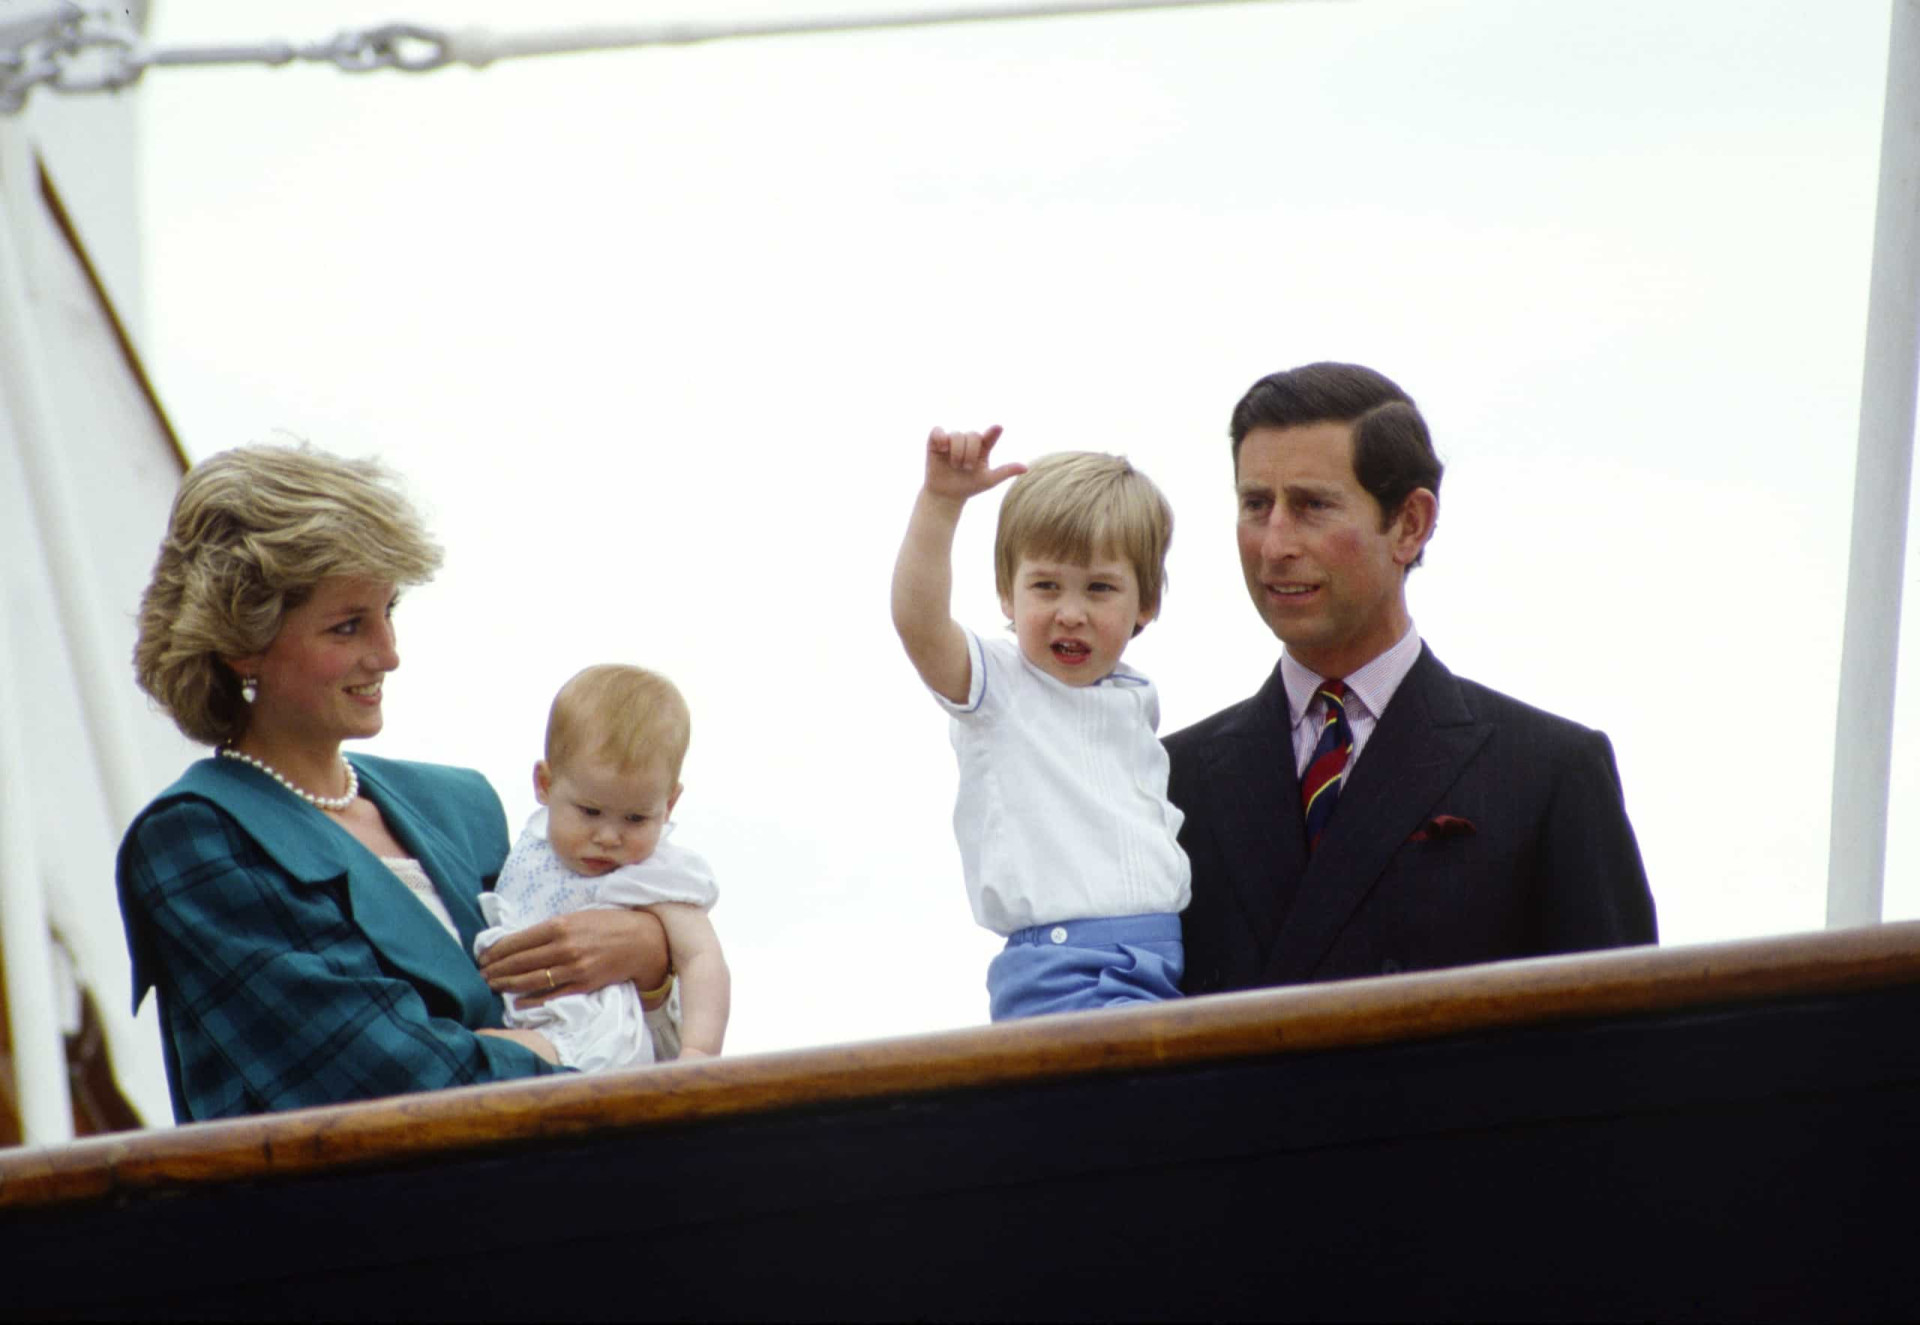 <p>Joining Prince Charles and Princess Diana on their 17-day tour of Italy's sights and cities in April-May 1985 was Prince William and Prince Harry. The family are seen on board <em>Britannia</em> at Venice.</p><p>You may also like:<a href="https://www.starsinsider.com/n/394782?utm_source=msn.com&utm_medium=display&utm_campaign=referral_description&utm_content=474709v3en-us"> The most unbelievably expensive weddings in history </a></p>